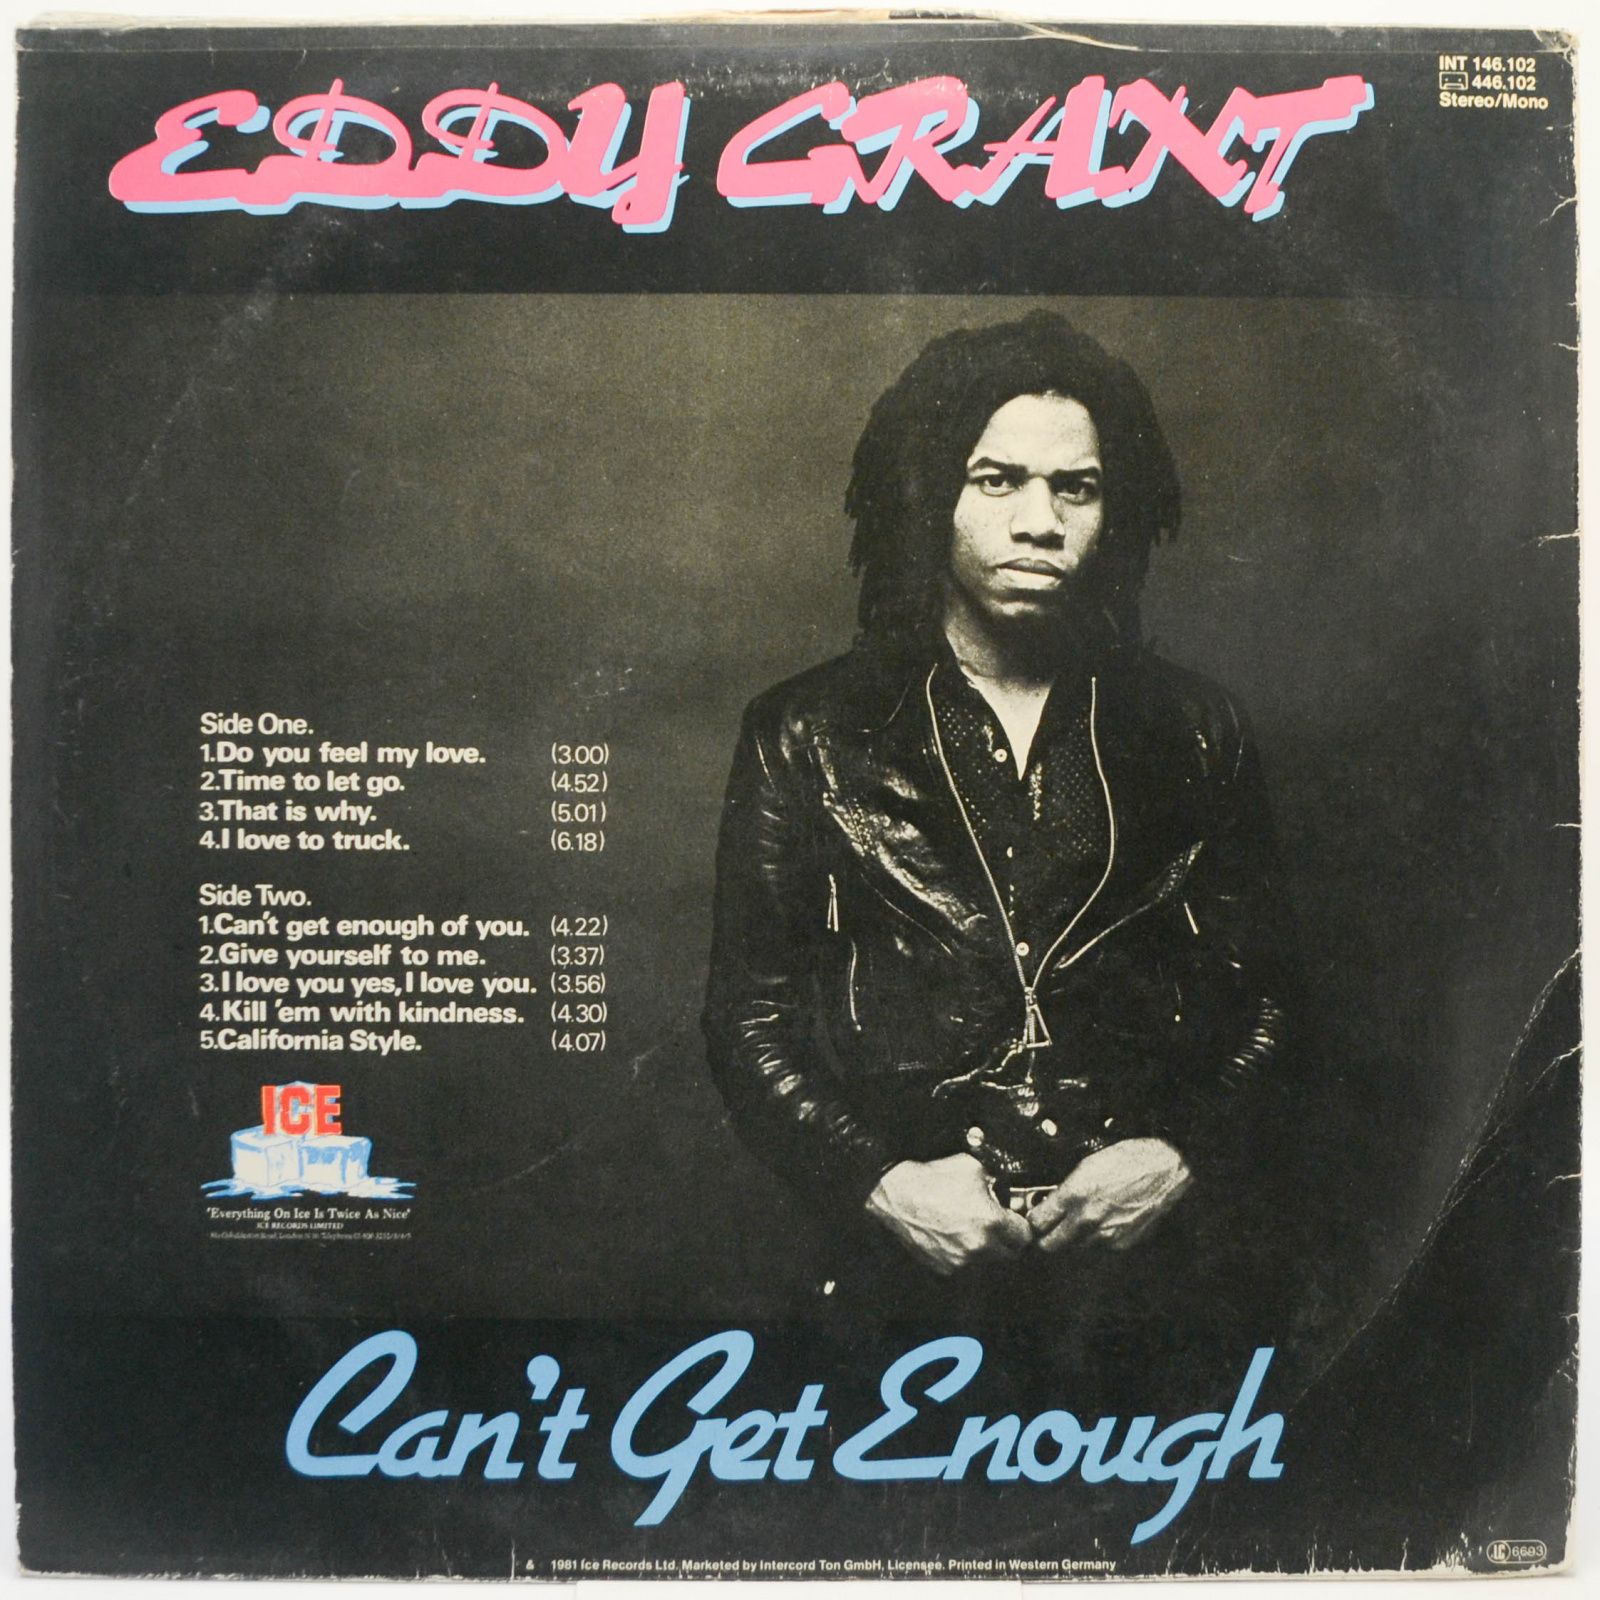 Eddy Grant — Can't Get Enough, 1981